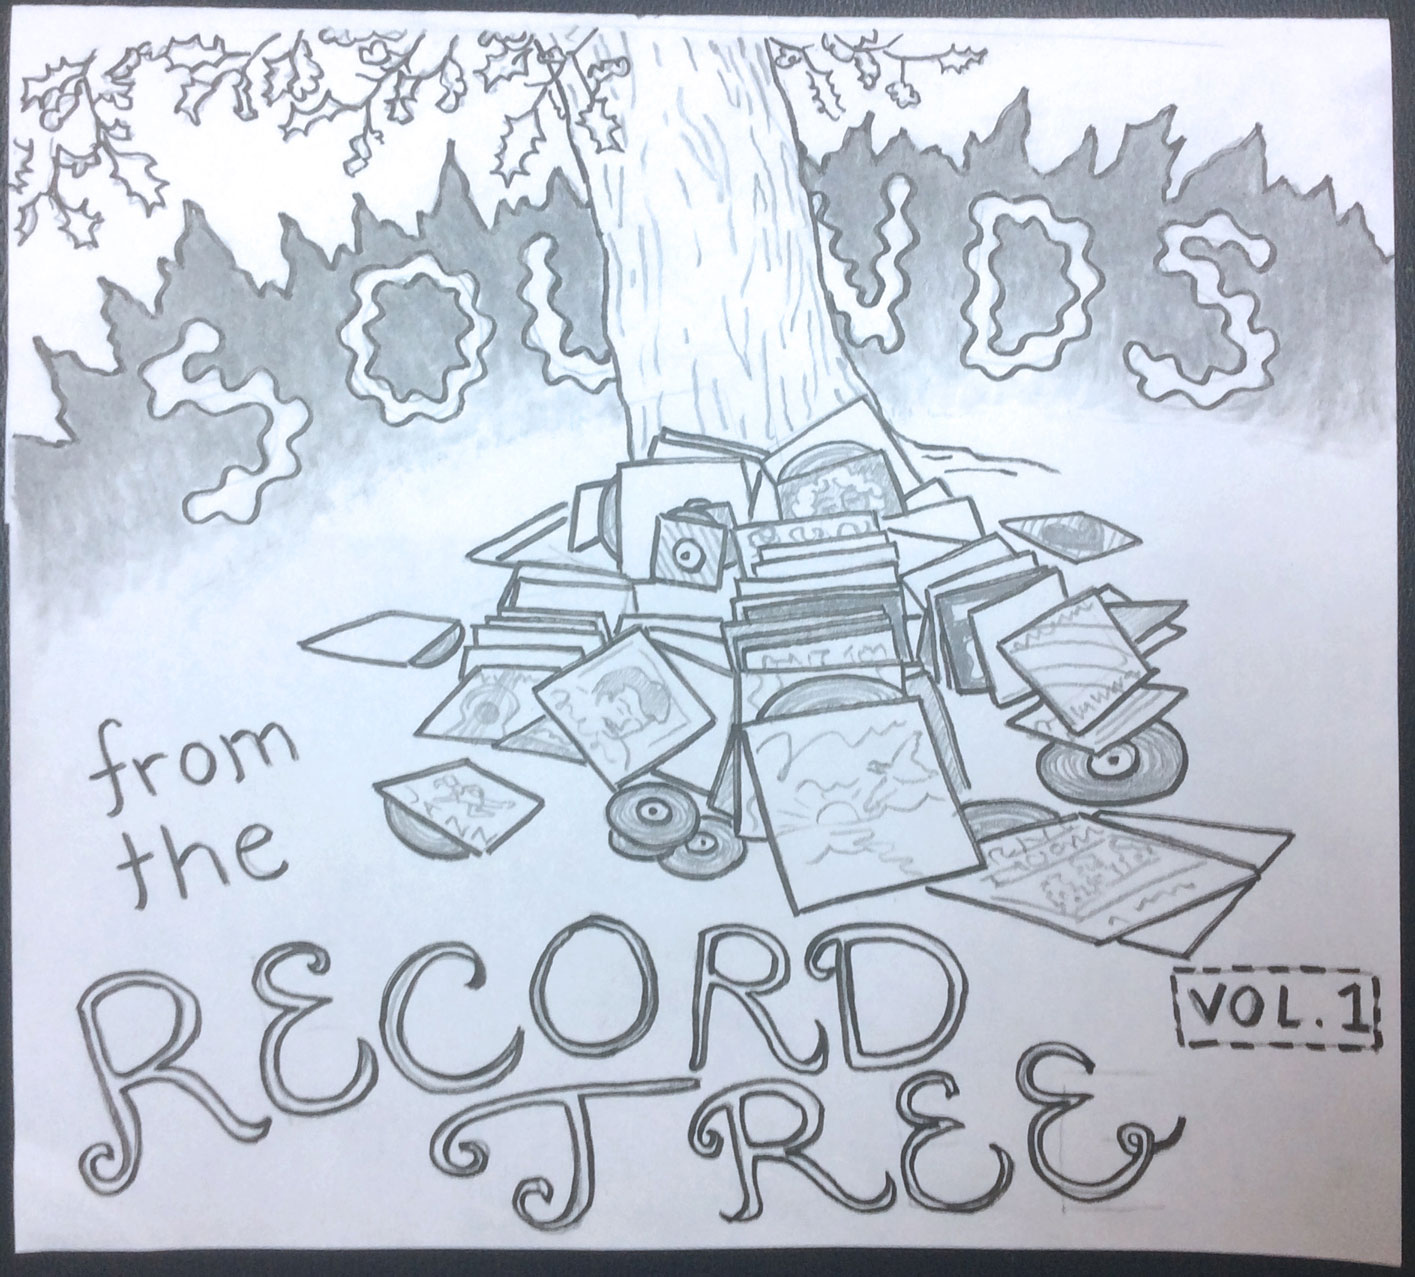 Cover for the Sounds of the Record Tree Volume 1 mixtape drawn by Martha Daghlian.